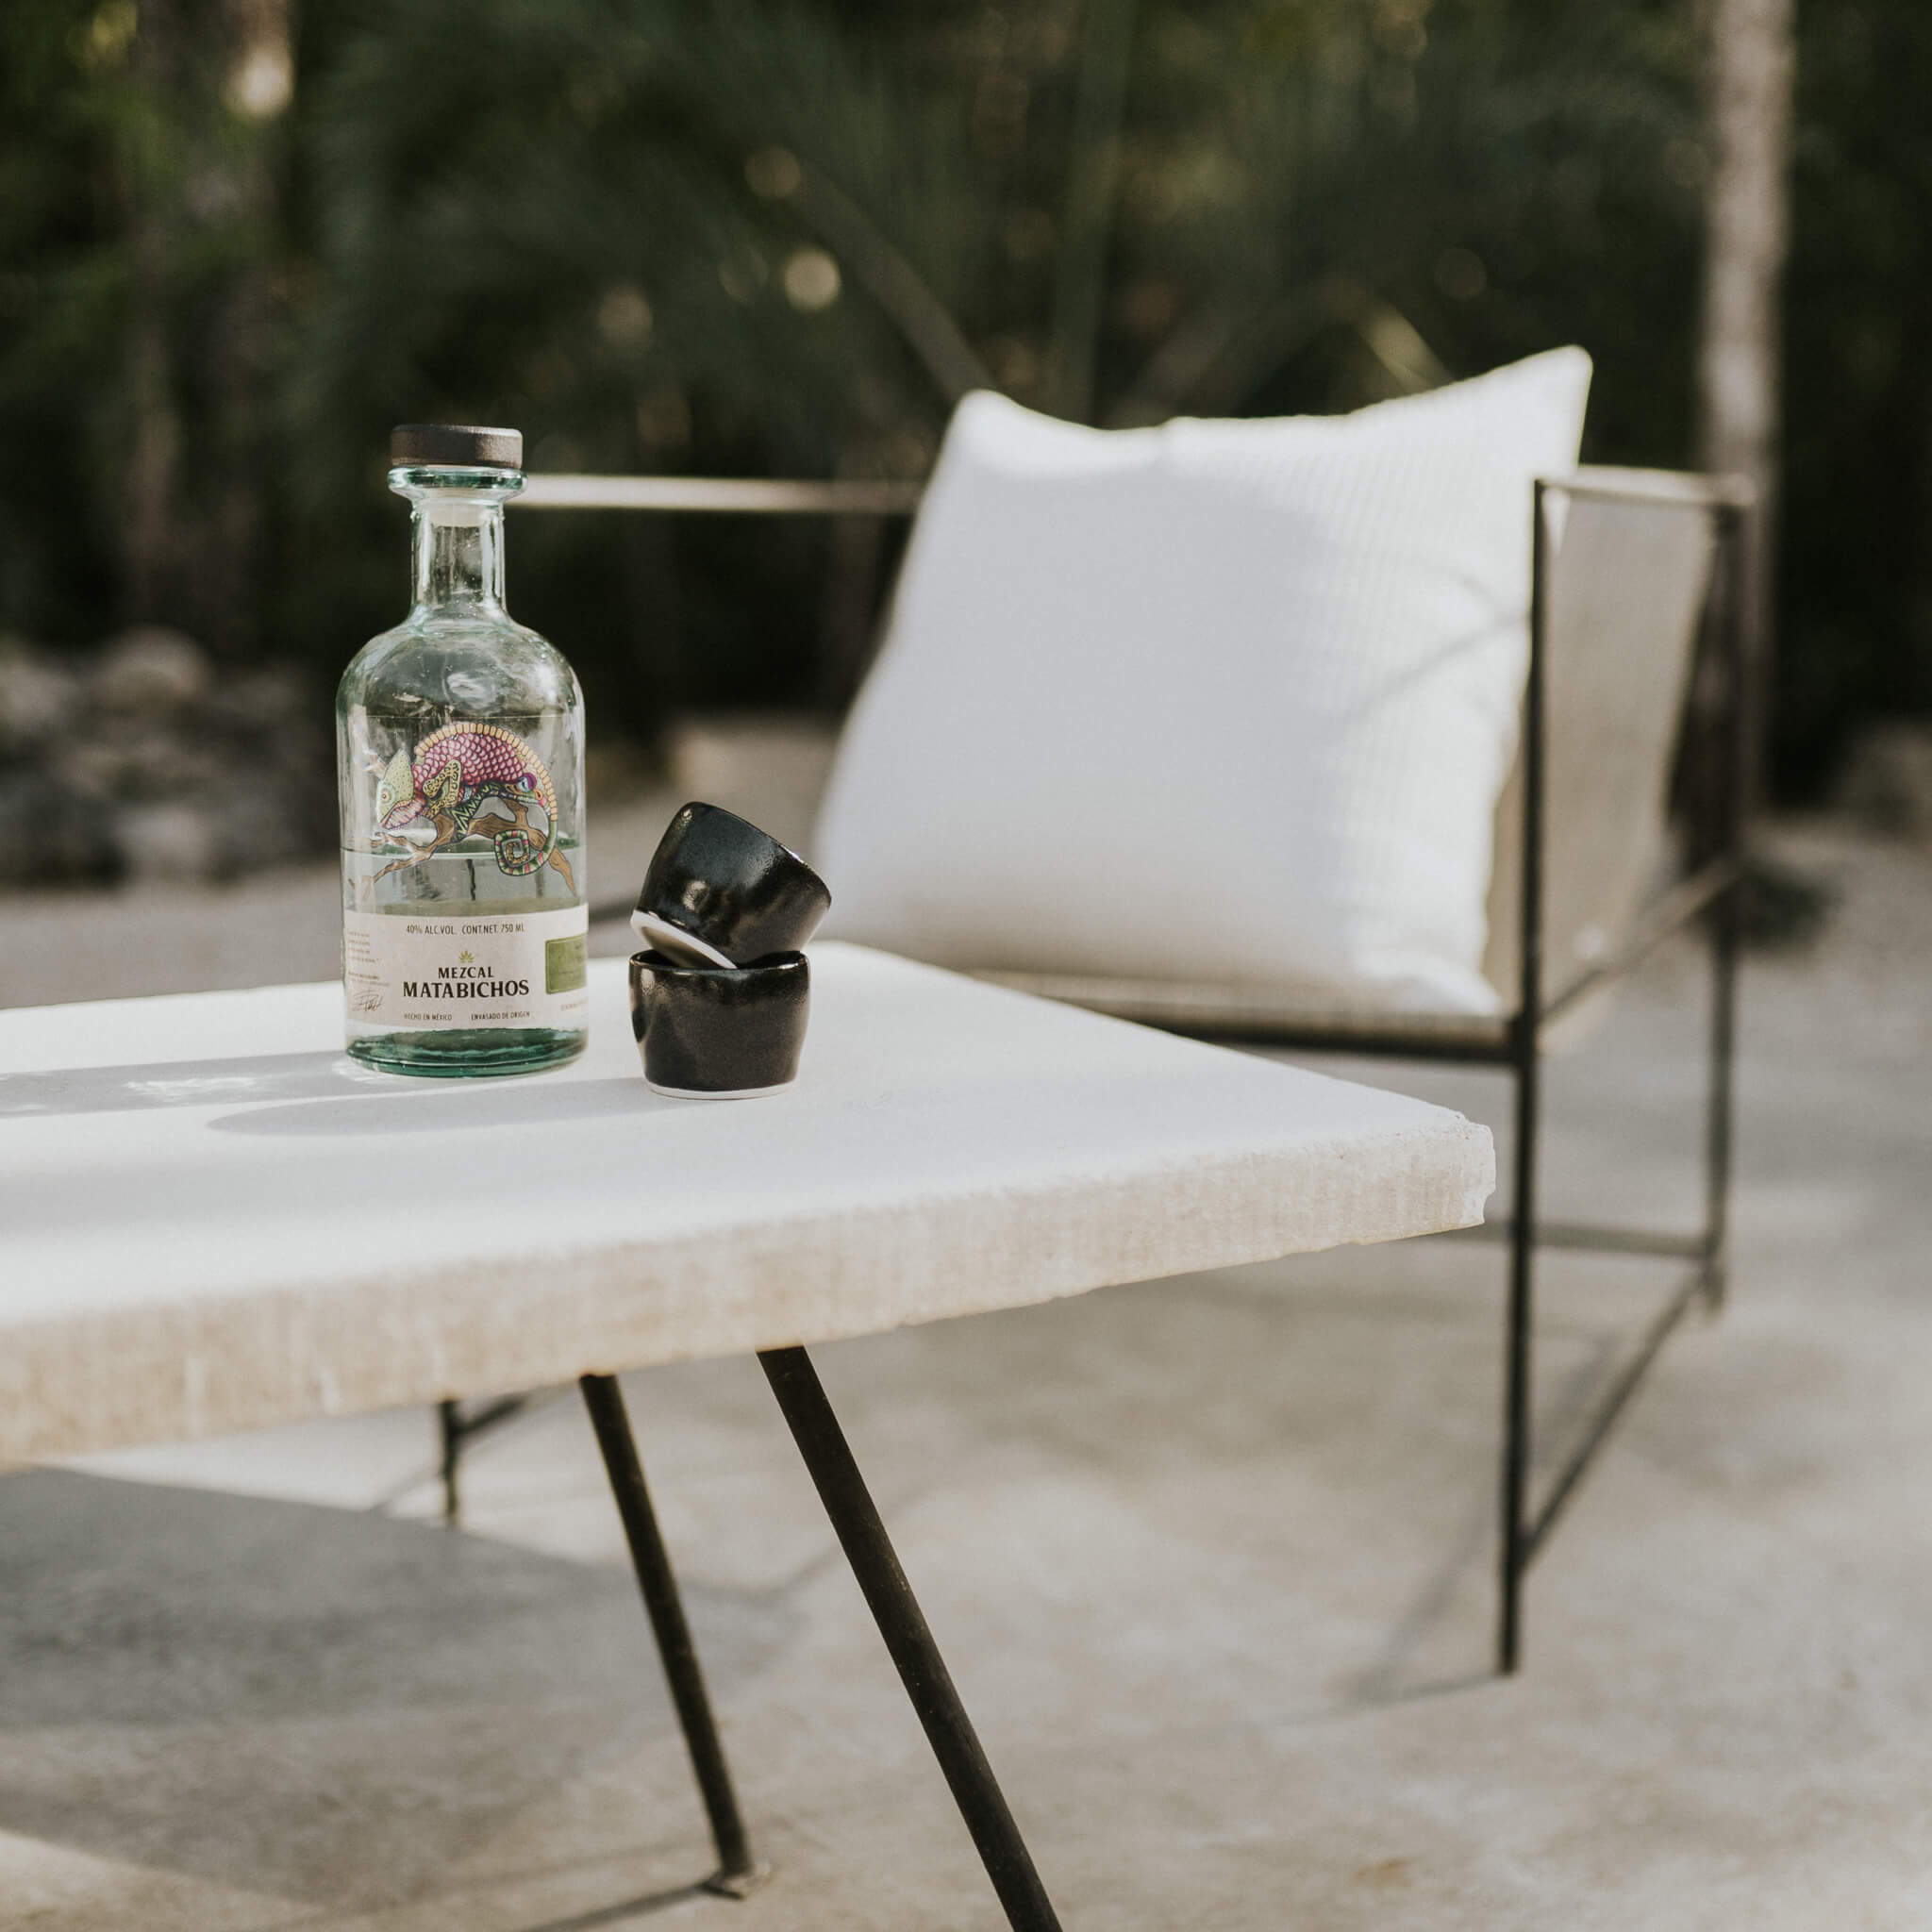 A set of black stoneware mezcal copitas on an outdoor table with a bottle of mezcal.